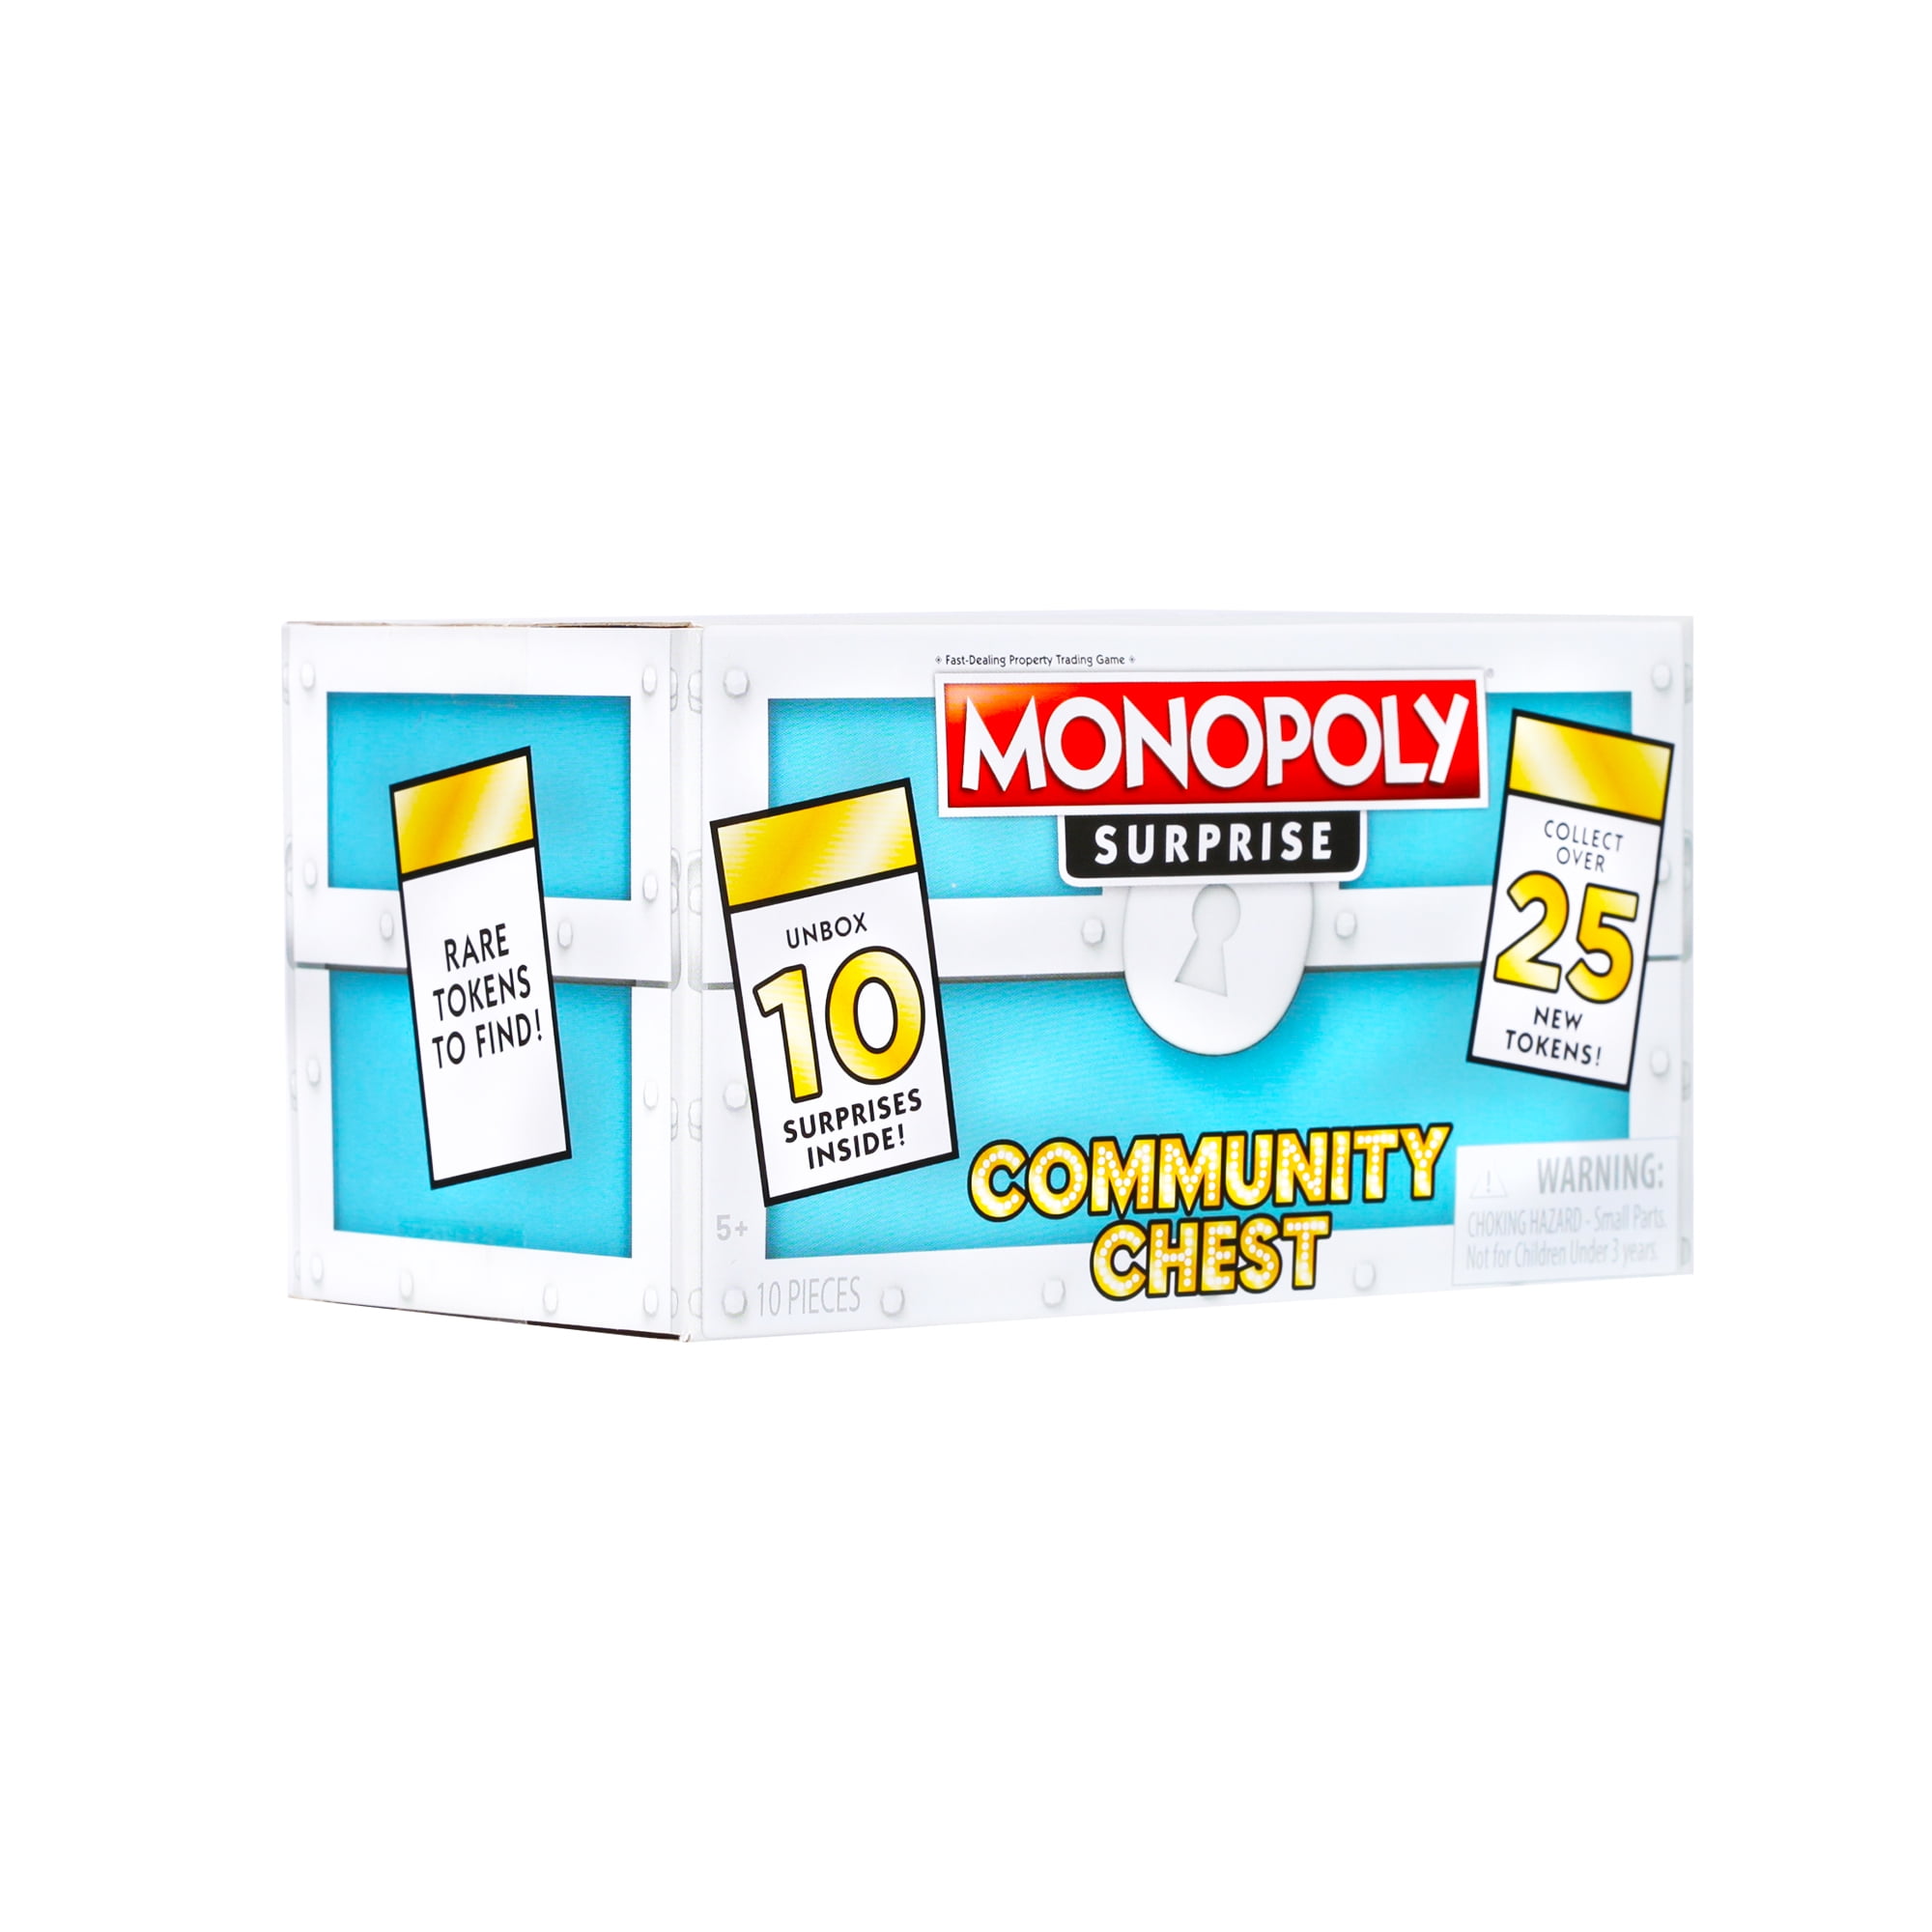 Hasbro Monopoly Surprise Series 1 Collectible Tokens 5 Piece for sale online